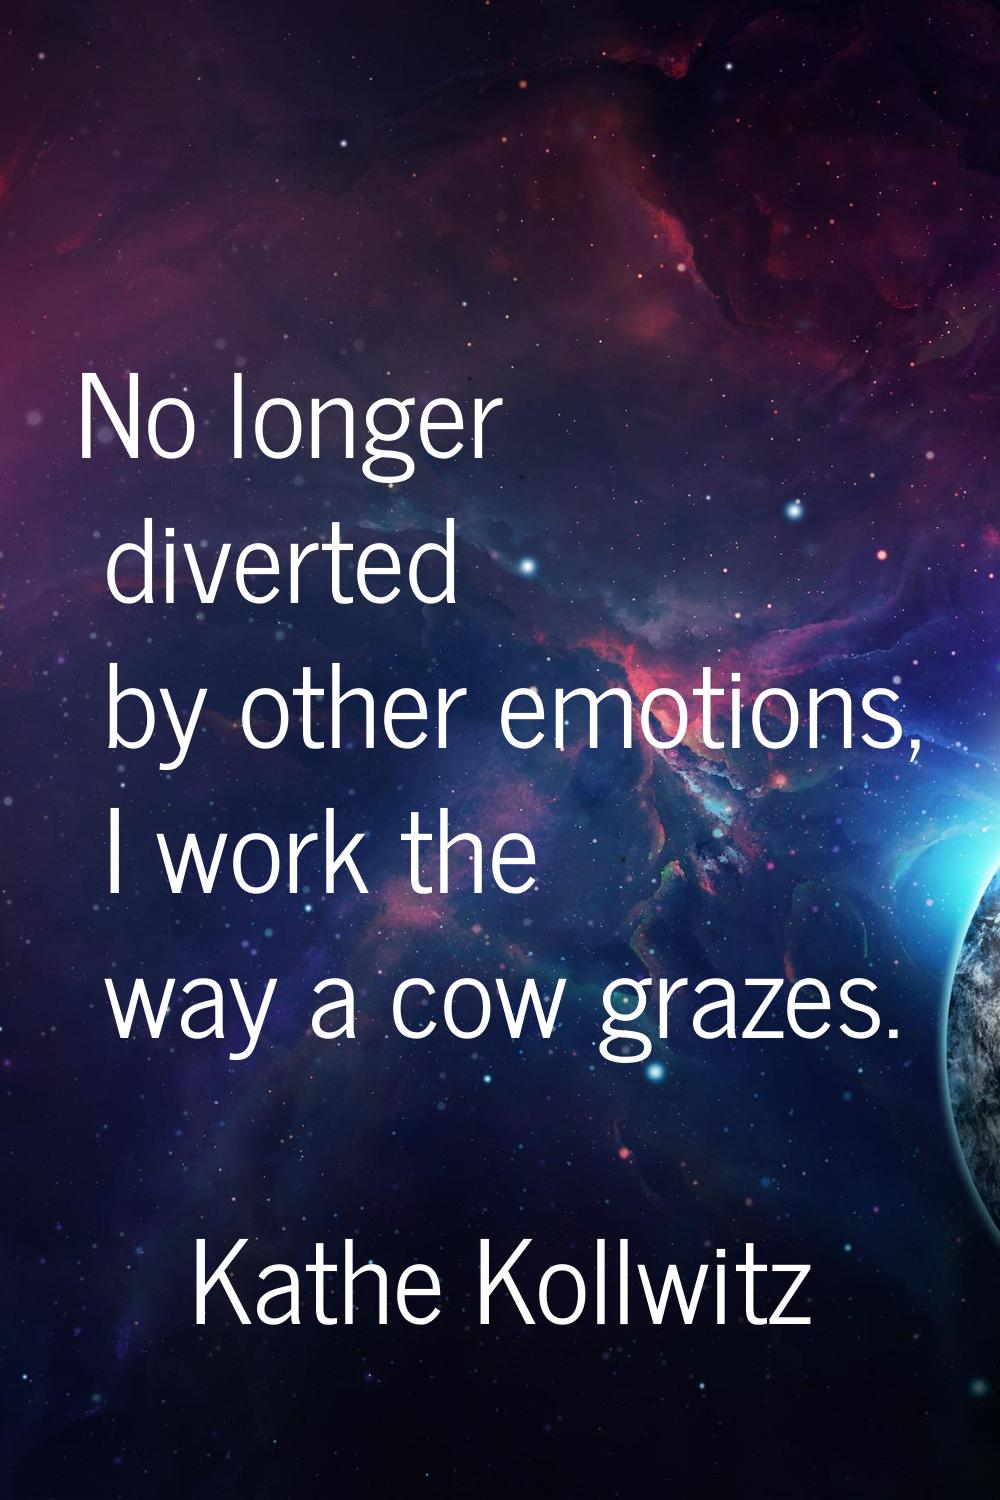 No longer diverted by other emotions, I work the way a cow grazes.